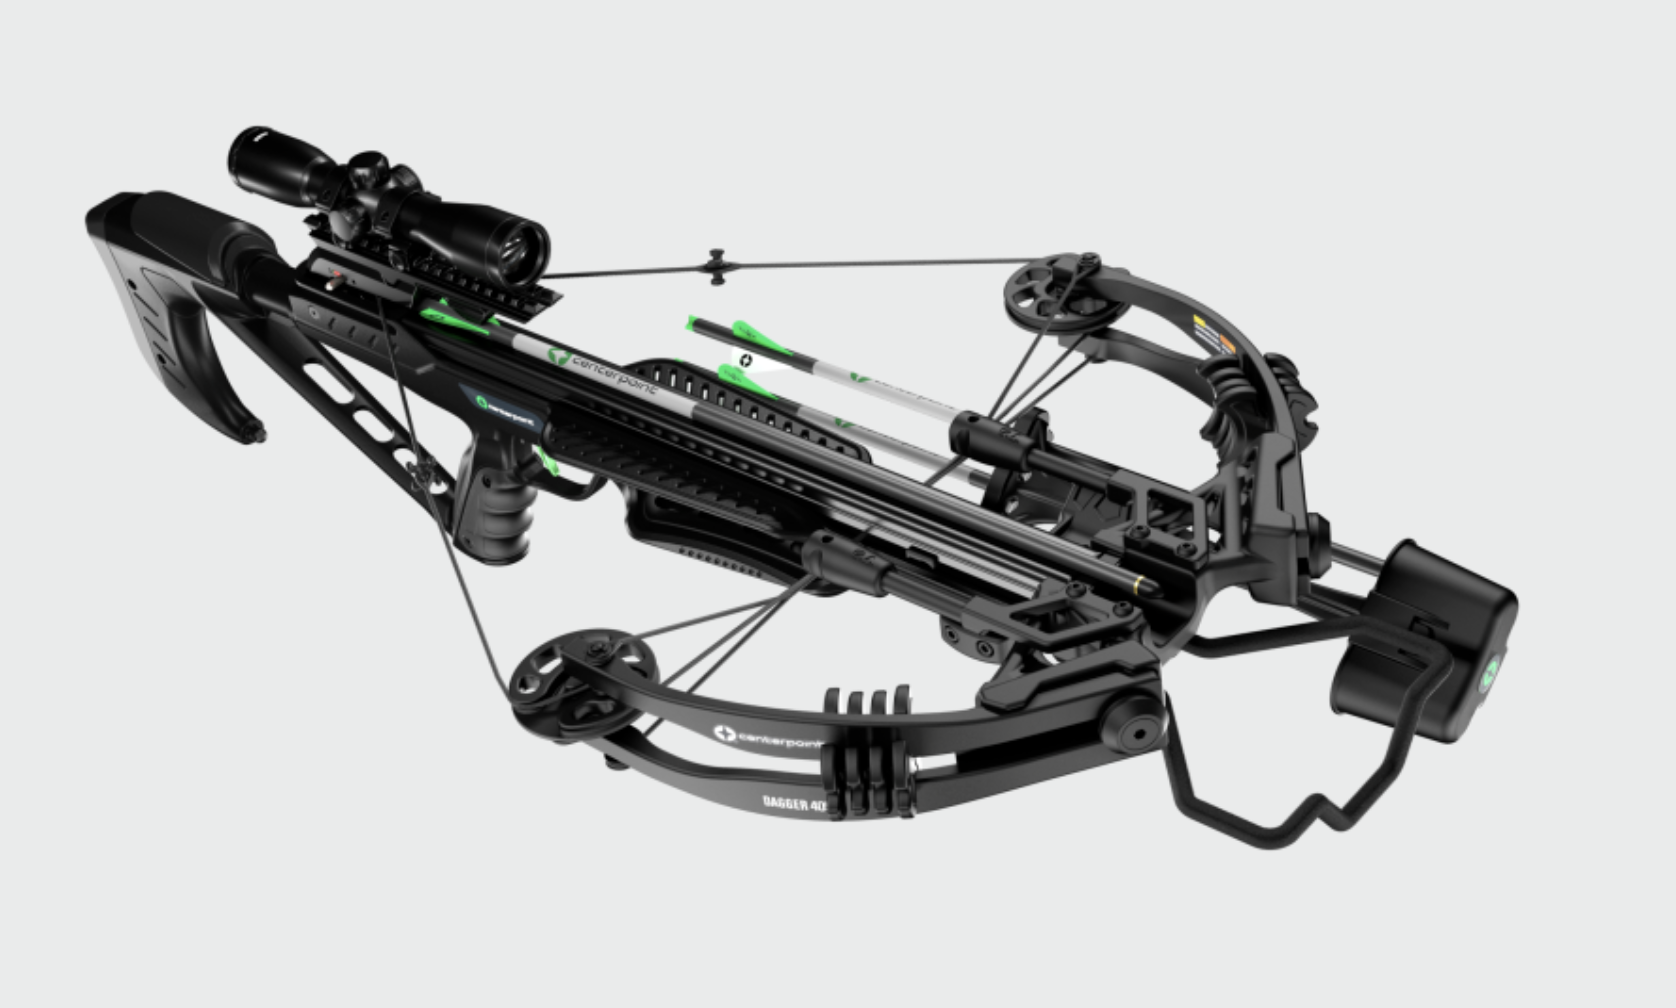 CenterPoint Dagger 405 Crossbow Introduced